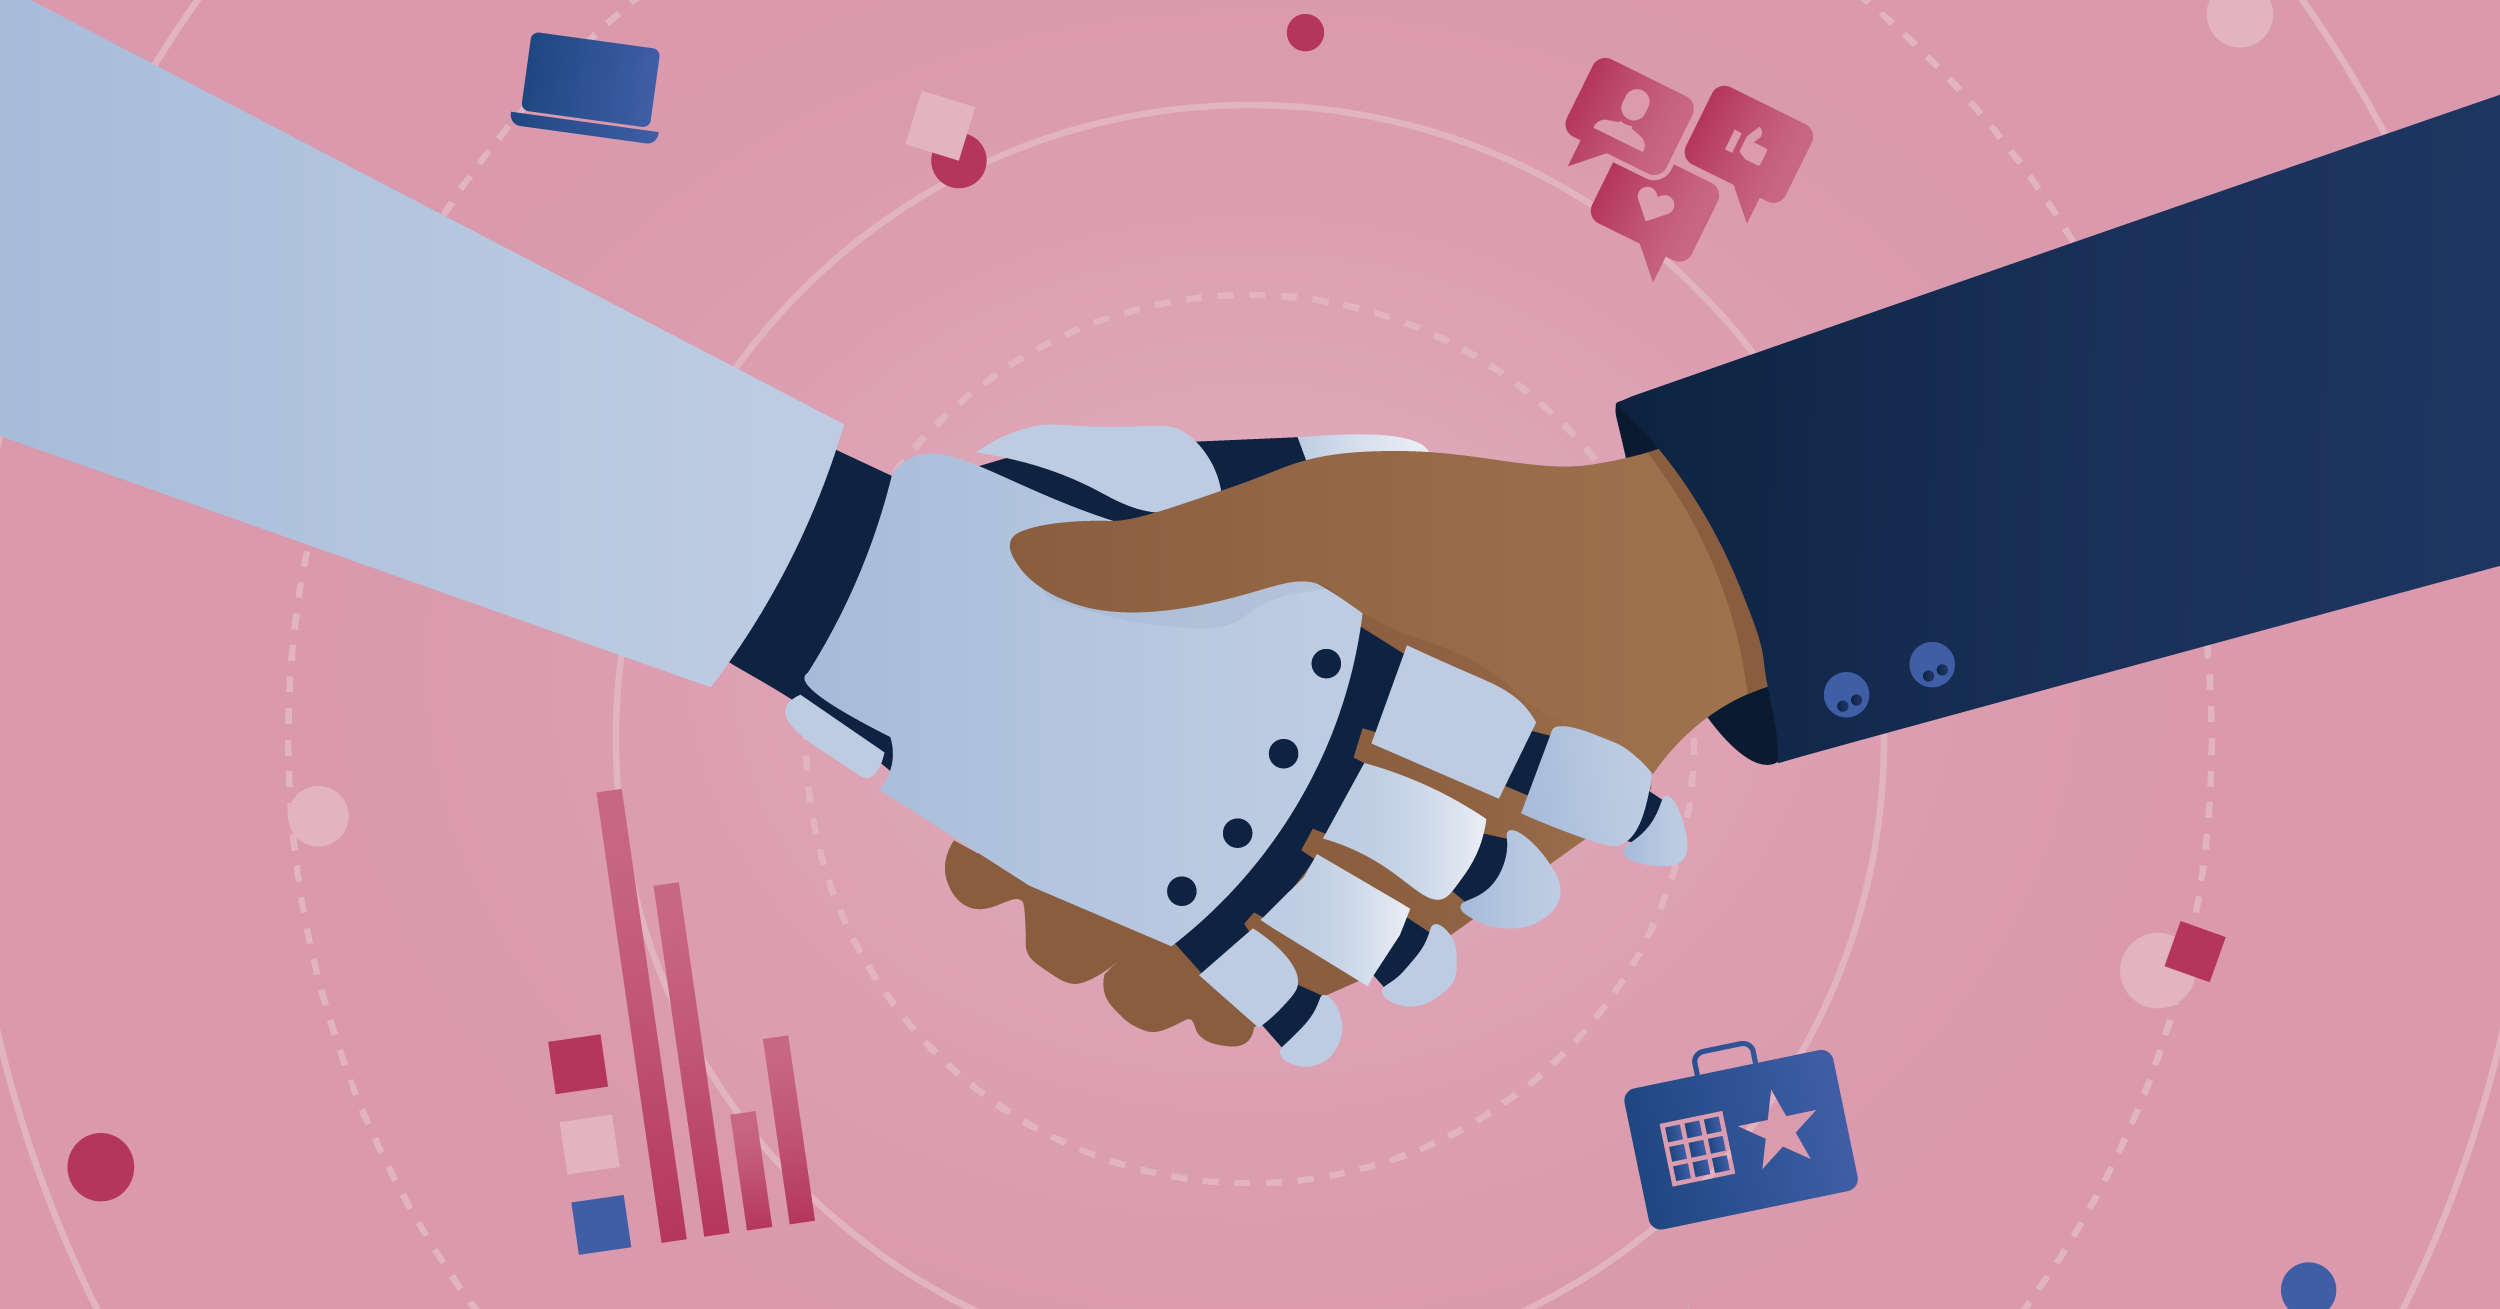 Illustration of a robot and a human shaking hands in front of a pink background with blue and red social media and internet related icons.